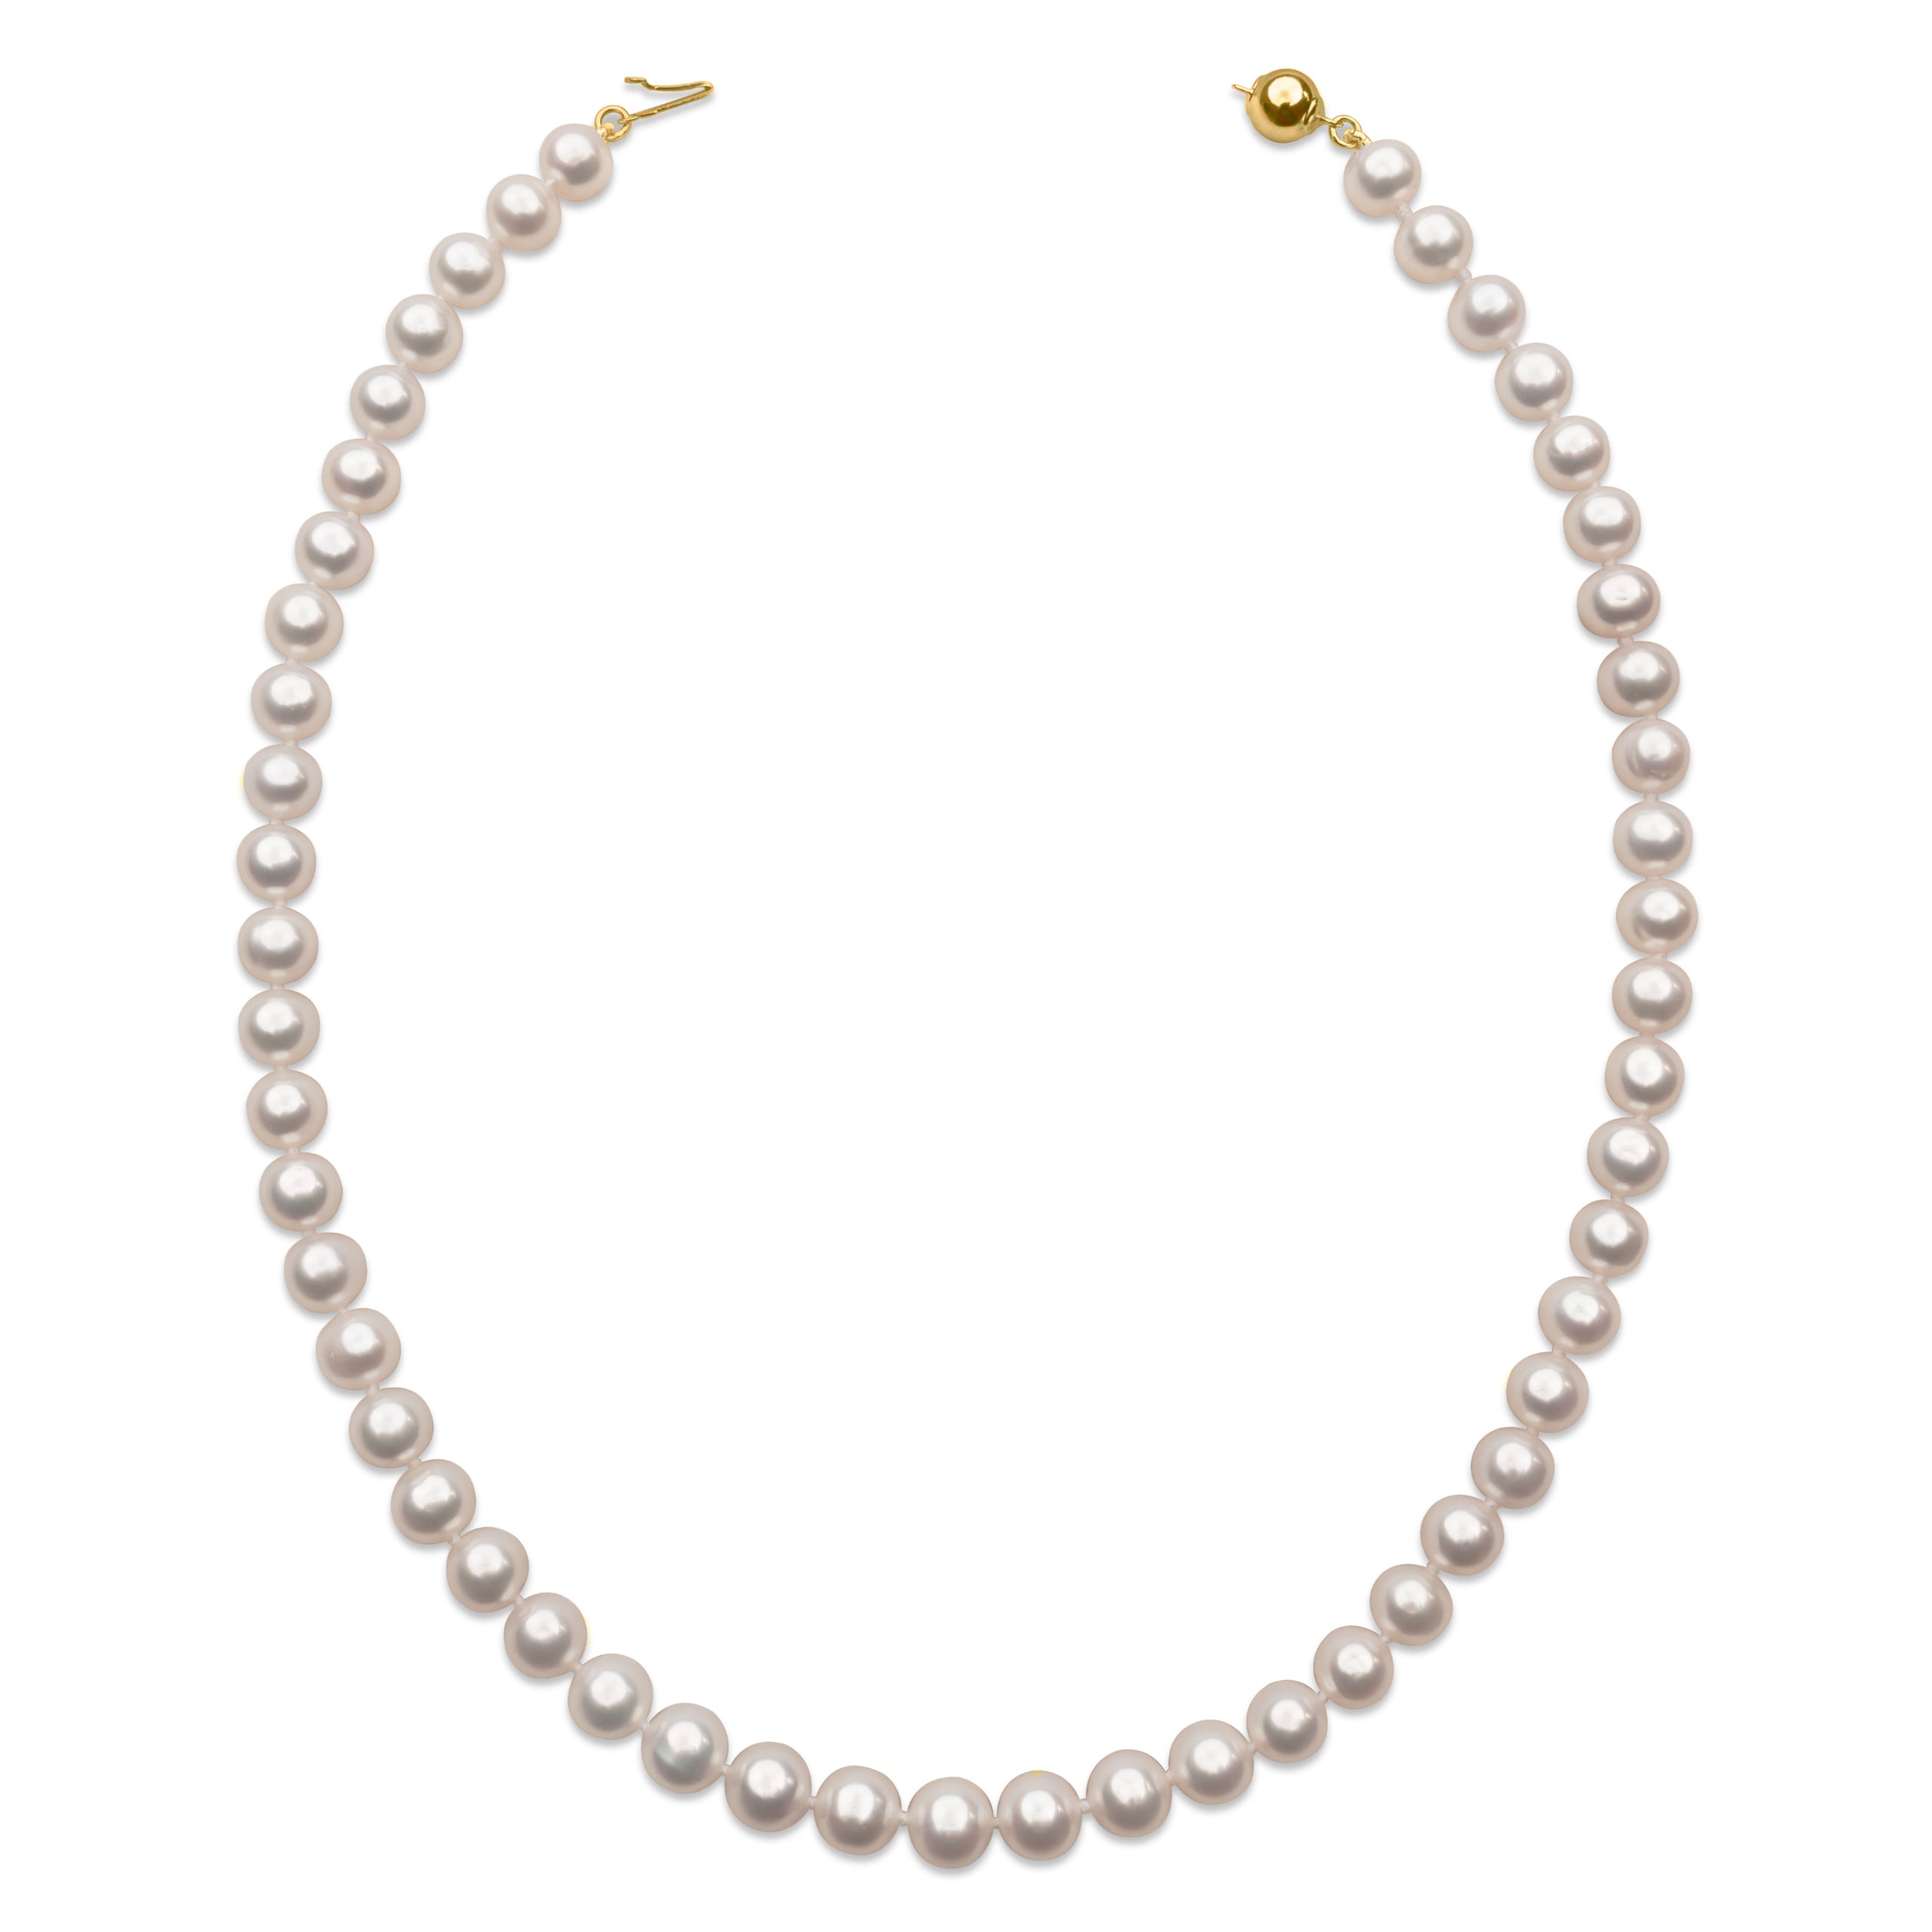 7.5-8.5mm AA+ Freshwater Cultured Pearl Necklace, 90cm long | 18K Gold